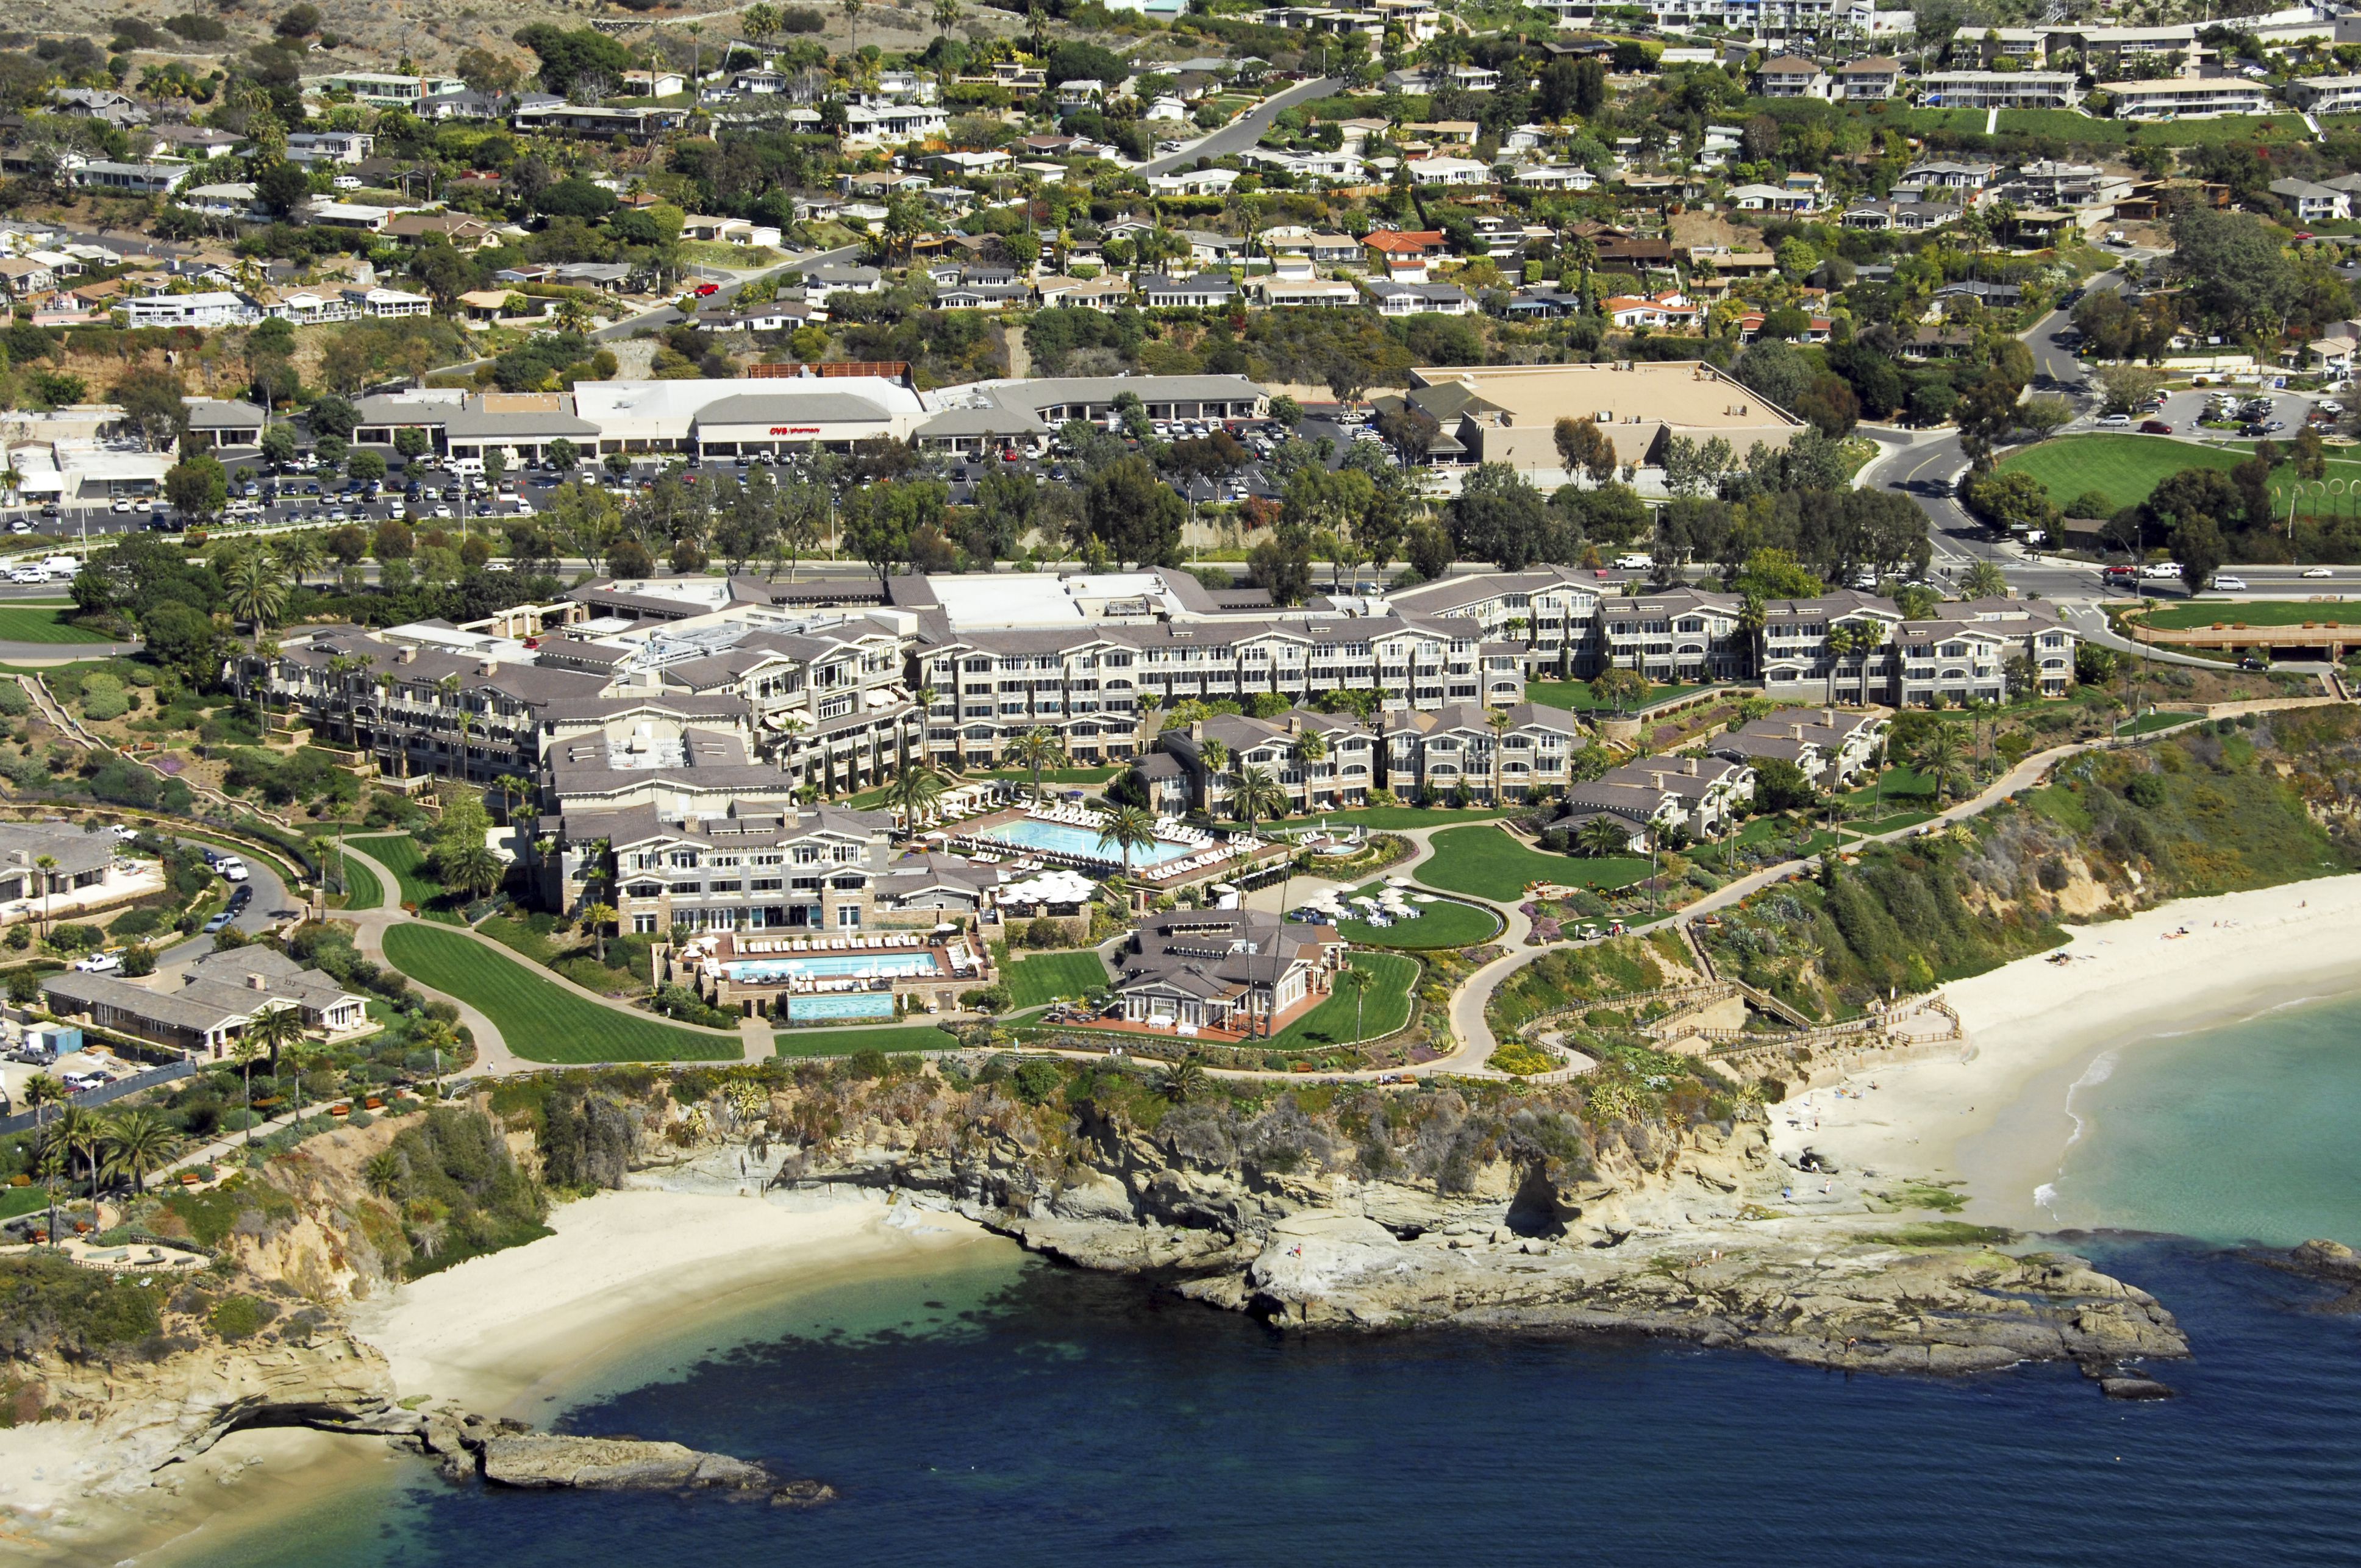 California Beach Resorts How to Find One You Will Love